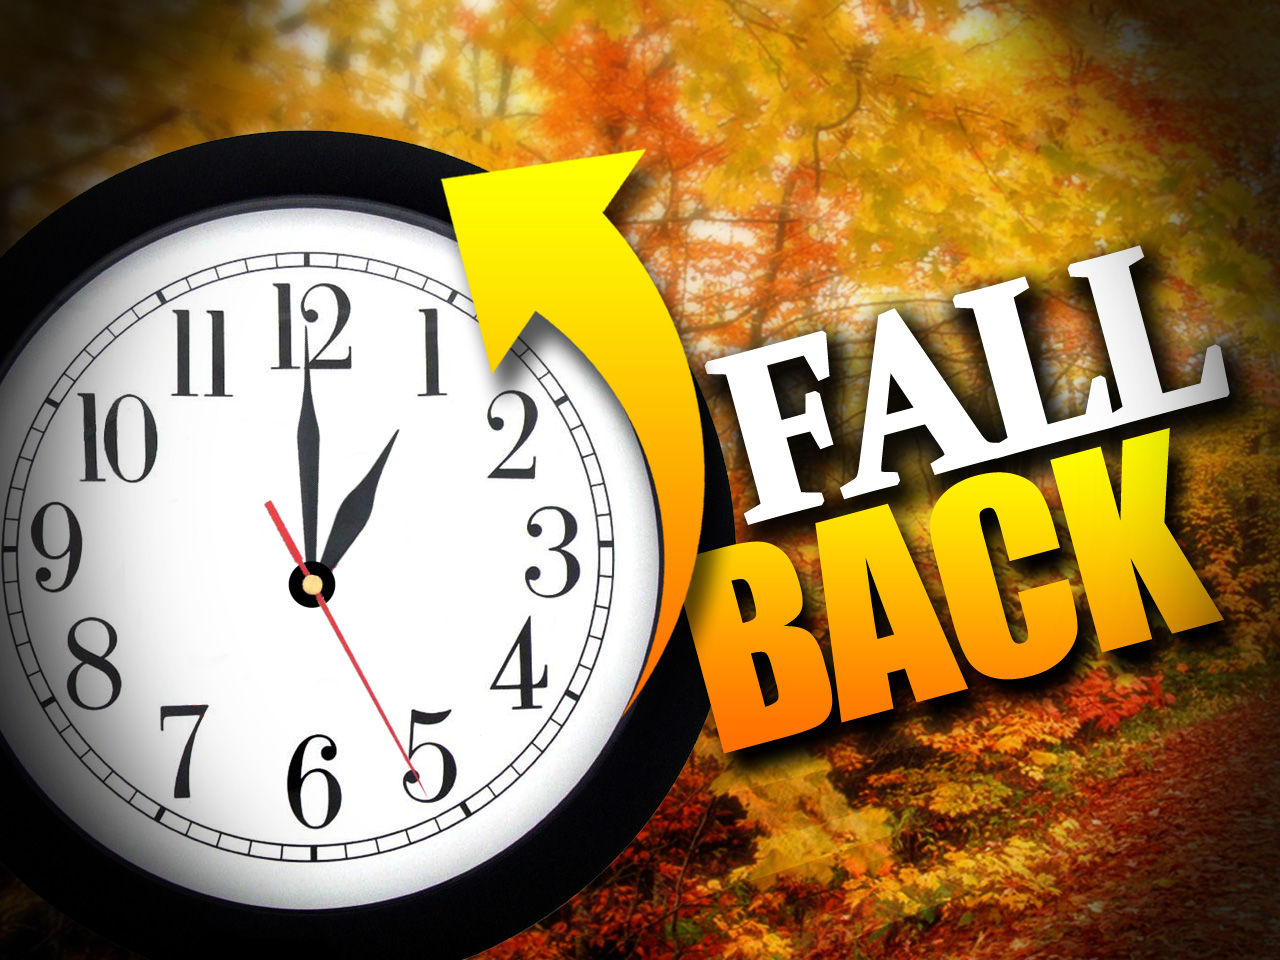 Daylight Savings Time Wallpaper Pictures Photos